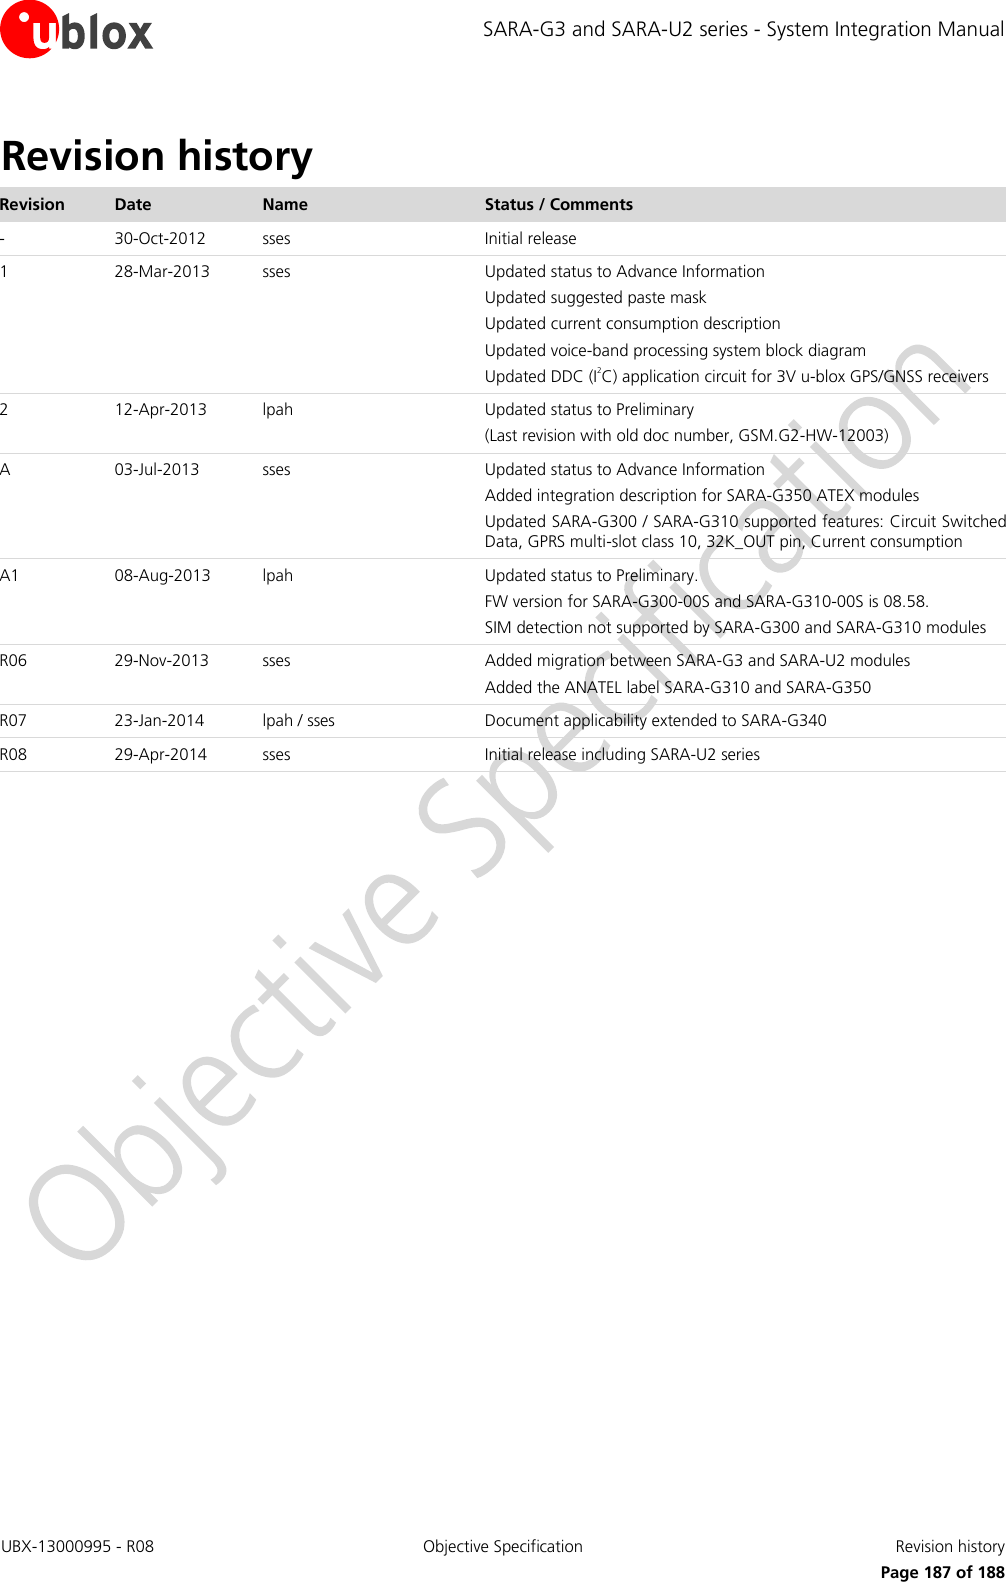 SARA-G3 and SARA-U2 series - System Integration Manual UBX-13000995 - R08  Objective Specification  Revision history      Page 187 of 188 Revision history Revision Date Name Status / Comments - 30-Oct-2012 sses Initial release 1 28-Mar-2013 sses Updated status to Advance Information Updated suggested paste mask  Updated current consumption description Updated voice-band processing system block diagram Updated DDC (I2C) application circuit for 3V u-blox GPS/GNSS receivers 2 12-Apr-2013 lpah Updated status to Preliminary (Last revision with old doc number, GSM.G2-HW-12003) A 03-Jul-2013 sses Updated status to Advance Information Added integration description for SARA-G350 ATEX modules Updated SARA-G300 / SARA-G310 supported features: Circuit Switched Data, GPRS multi-slot class 10, 32K_OUT pin, Current consumption A1 08-Aug-2013 lpah Updated status to Preliminary.  FW version for SARA-G300-00S and SARA-G310-00S is 08.58. SIM detection not supported by SARA-G300 and SARA-G310 modules R06 29-Nov-2013 sses Added migration between SARA-G3 and SARA-U2 modules Added the ANATEL label SARA-G310 and SARA-G350 R07 23-Jan-2014 lpah / sses Document applicability extended to SARA-G340 R08 29-Apr-2014 sses Initial release including SARA-U2 series  